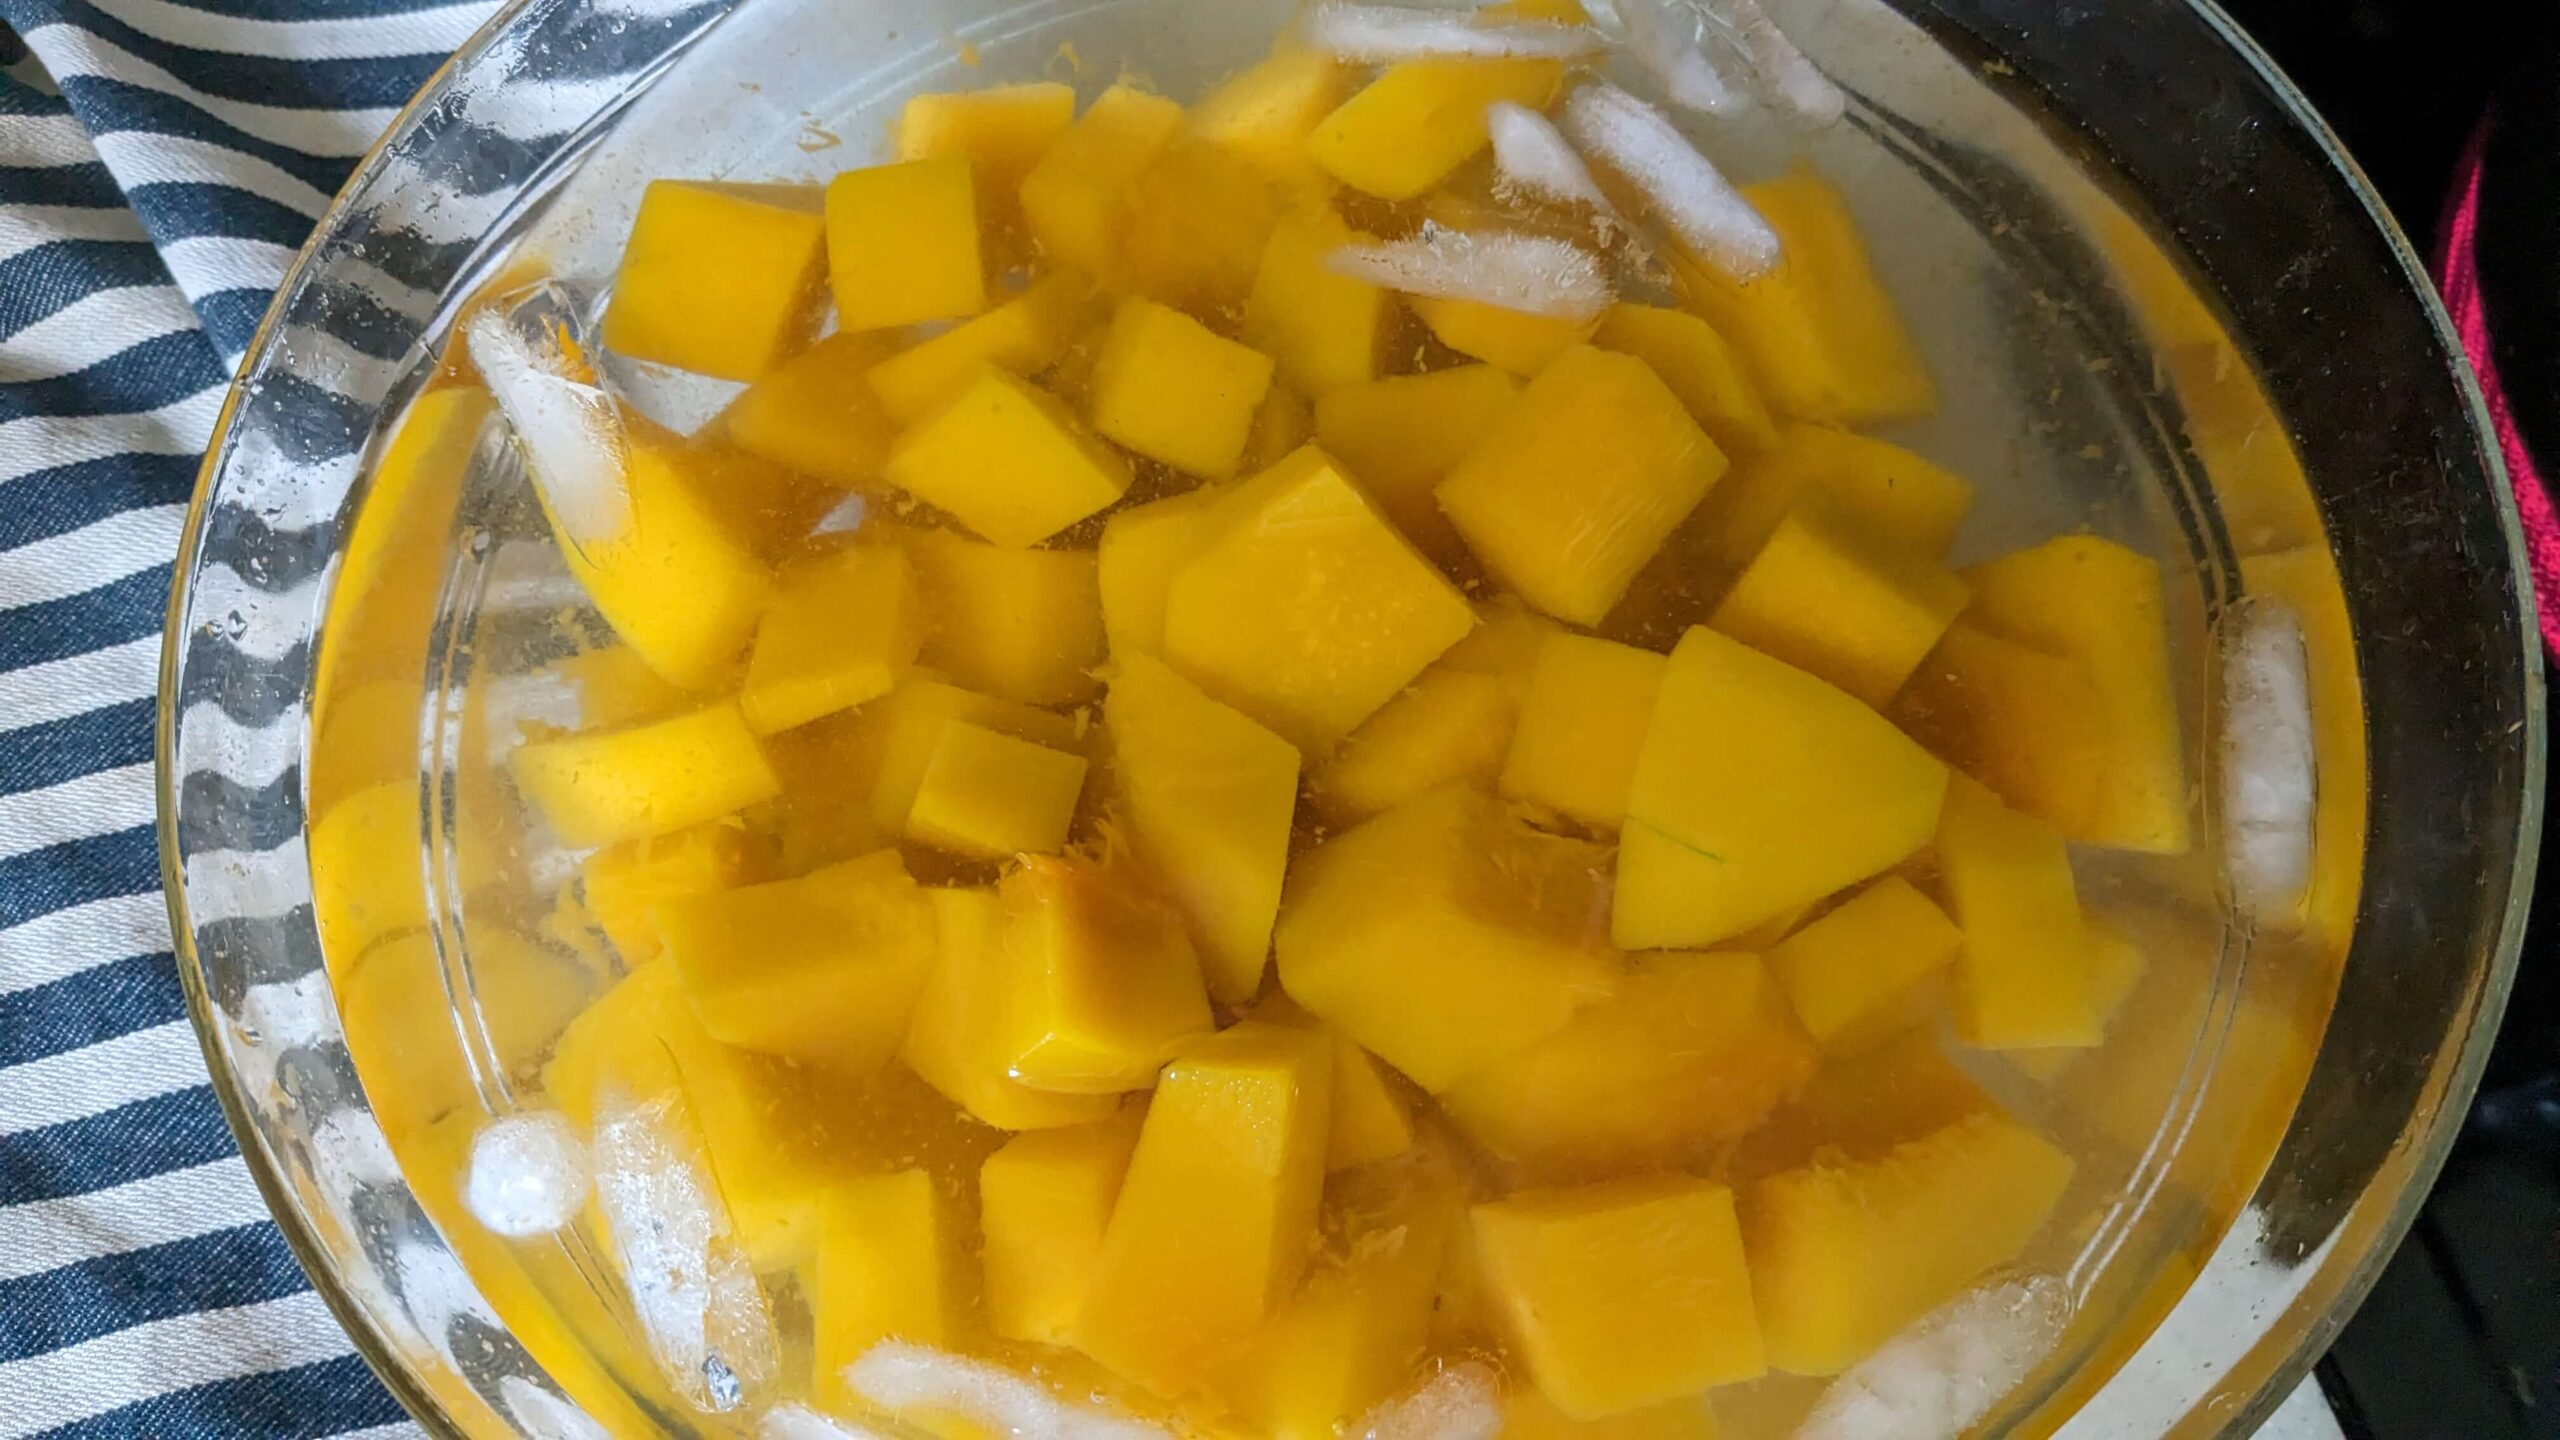 diced butternut squash in a bowl of ice water